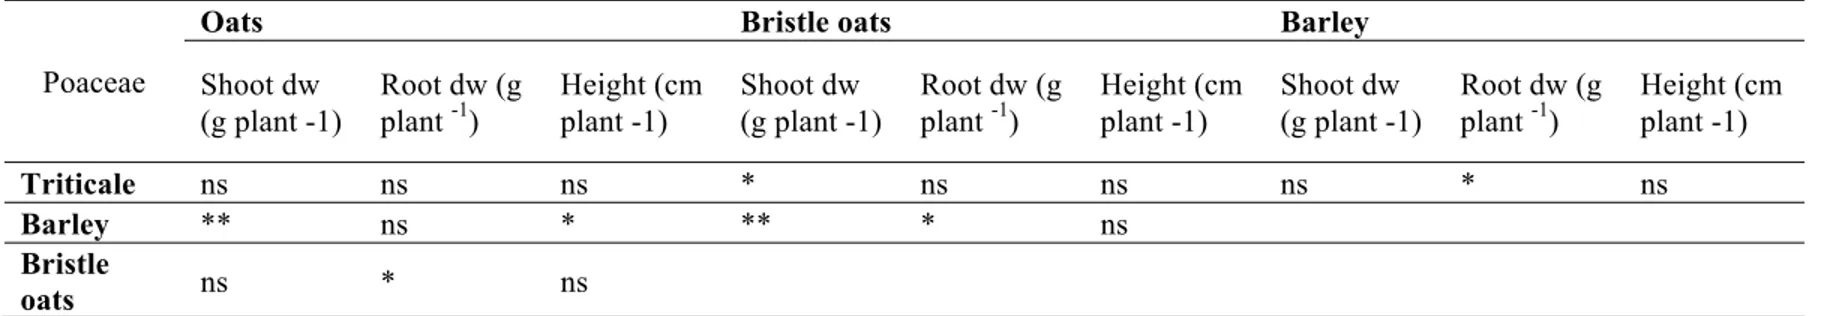 Table 1.3: Contrasts among Poaceae species for the parameters: shoot dry weight (dw), root dry weight (dw), and height